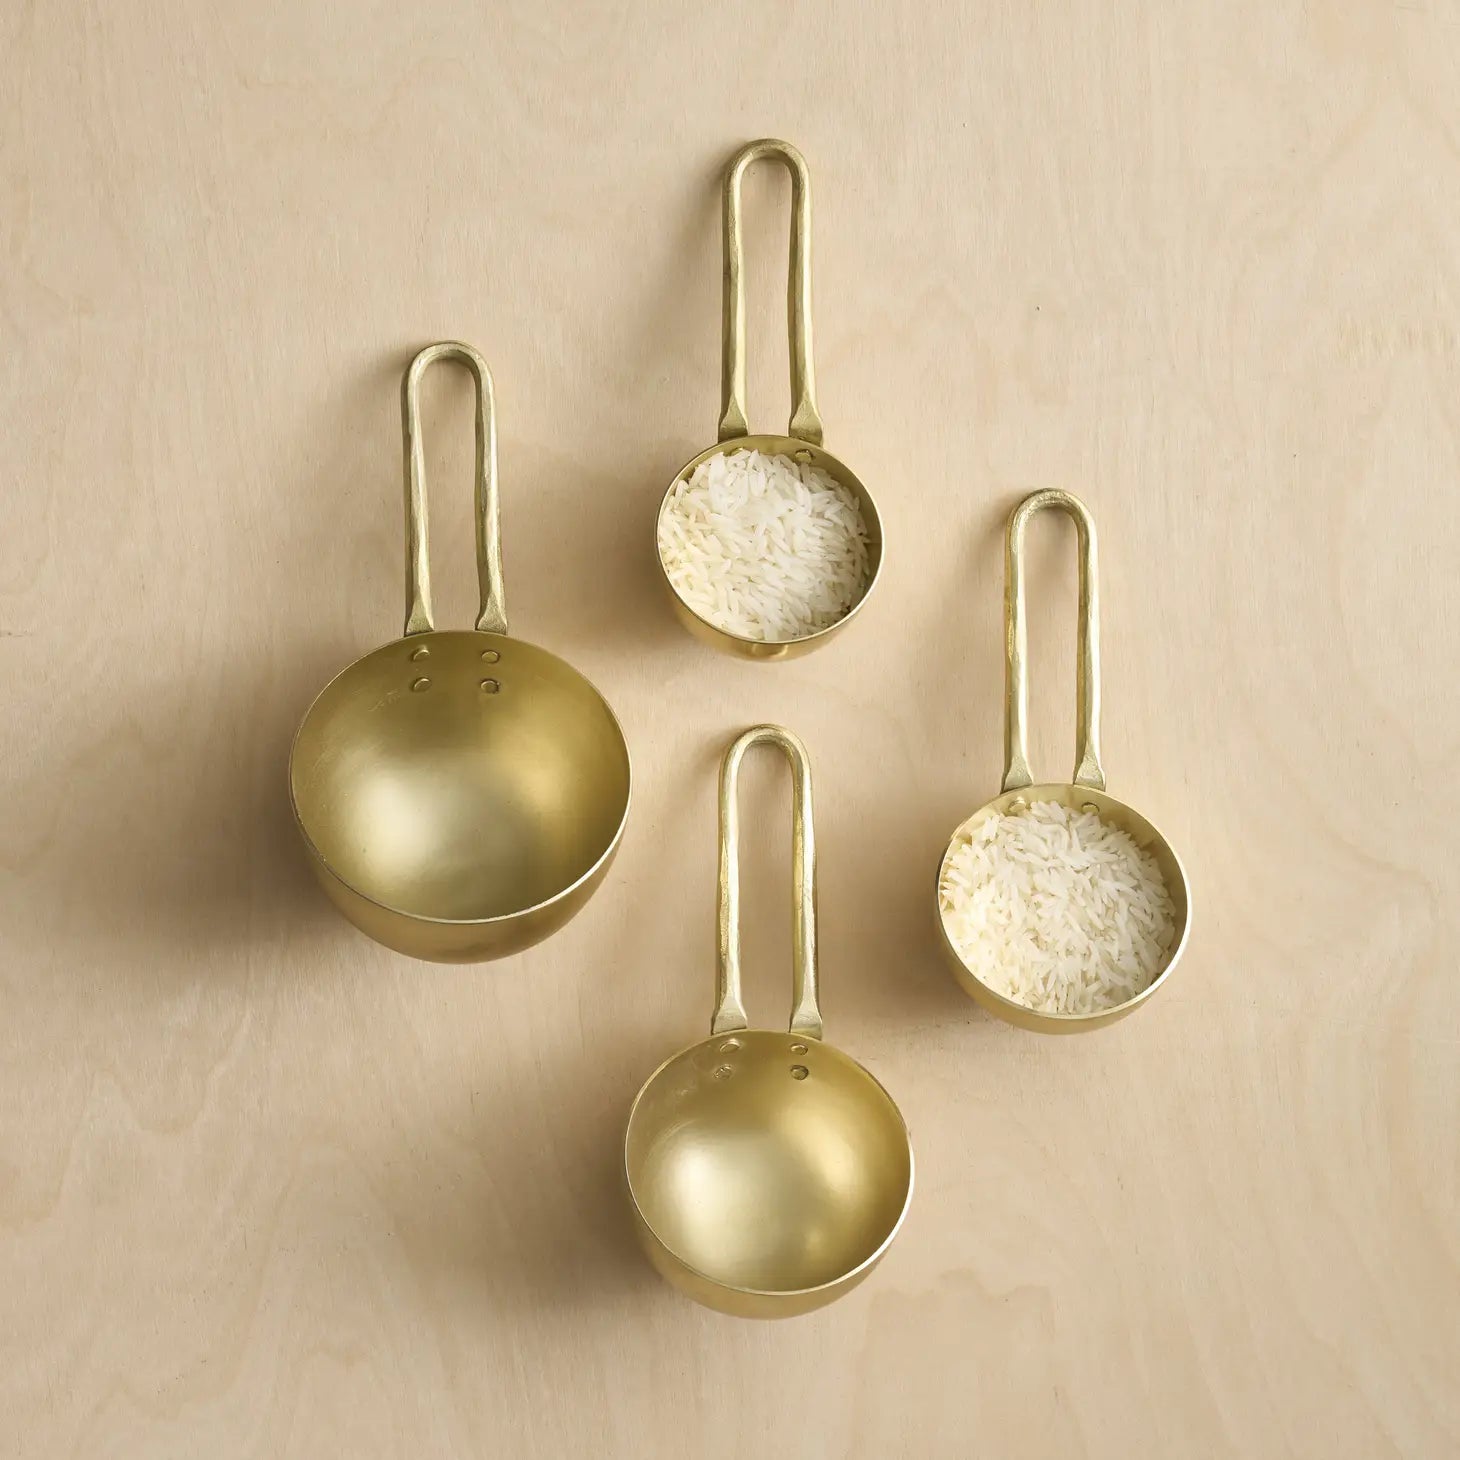 Forge Brass Measuring Scoops